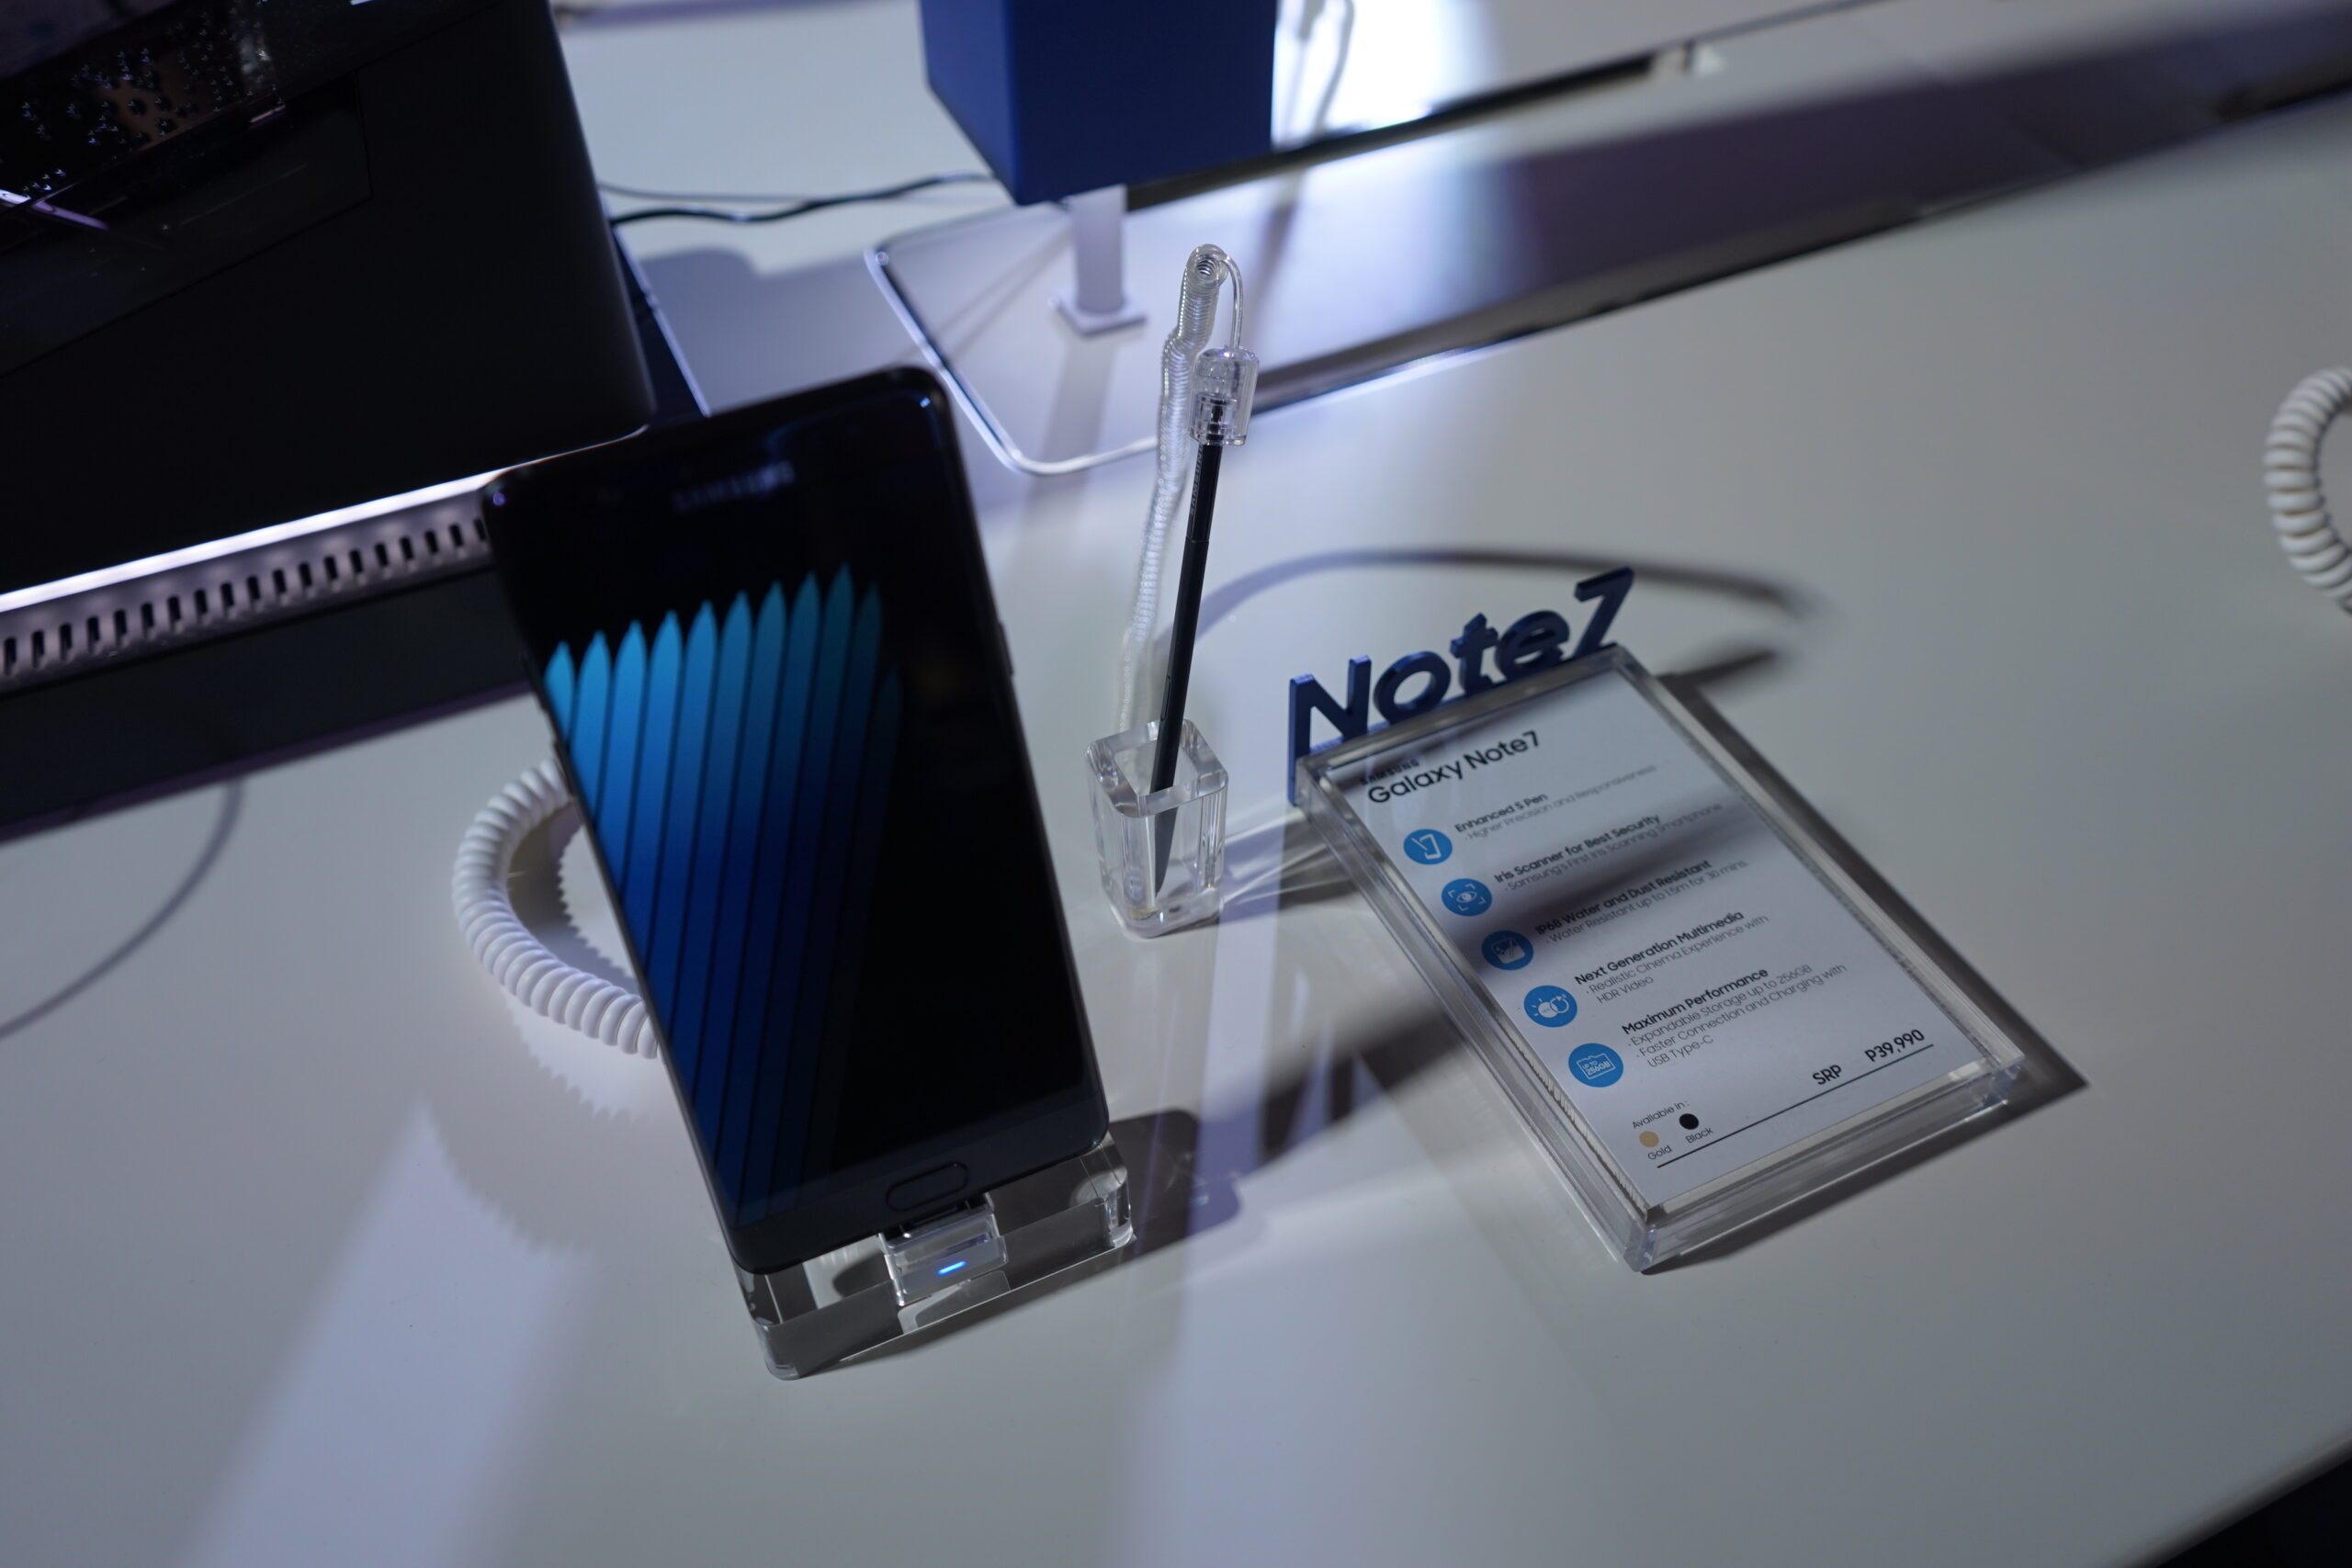 Replacement Note7 units available in PH starting October 1